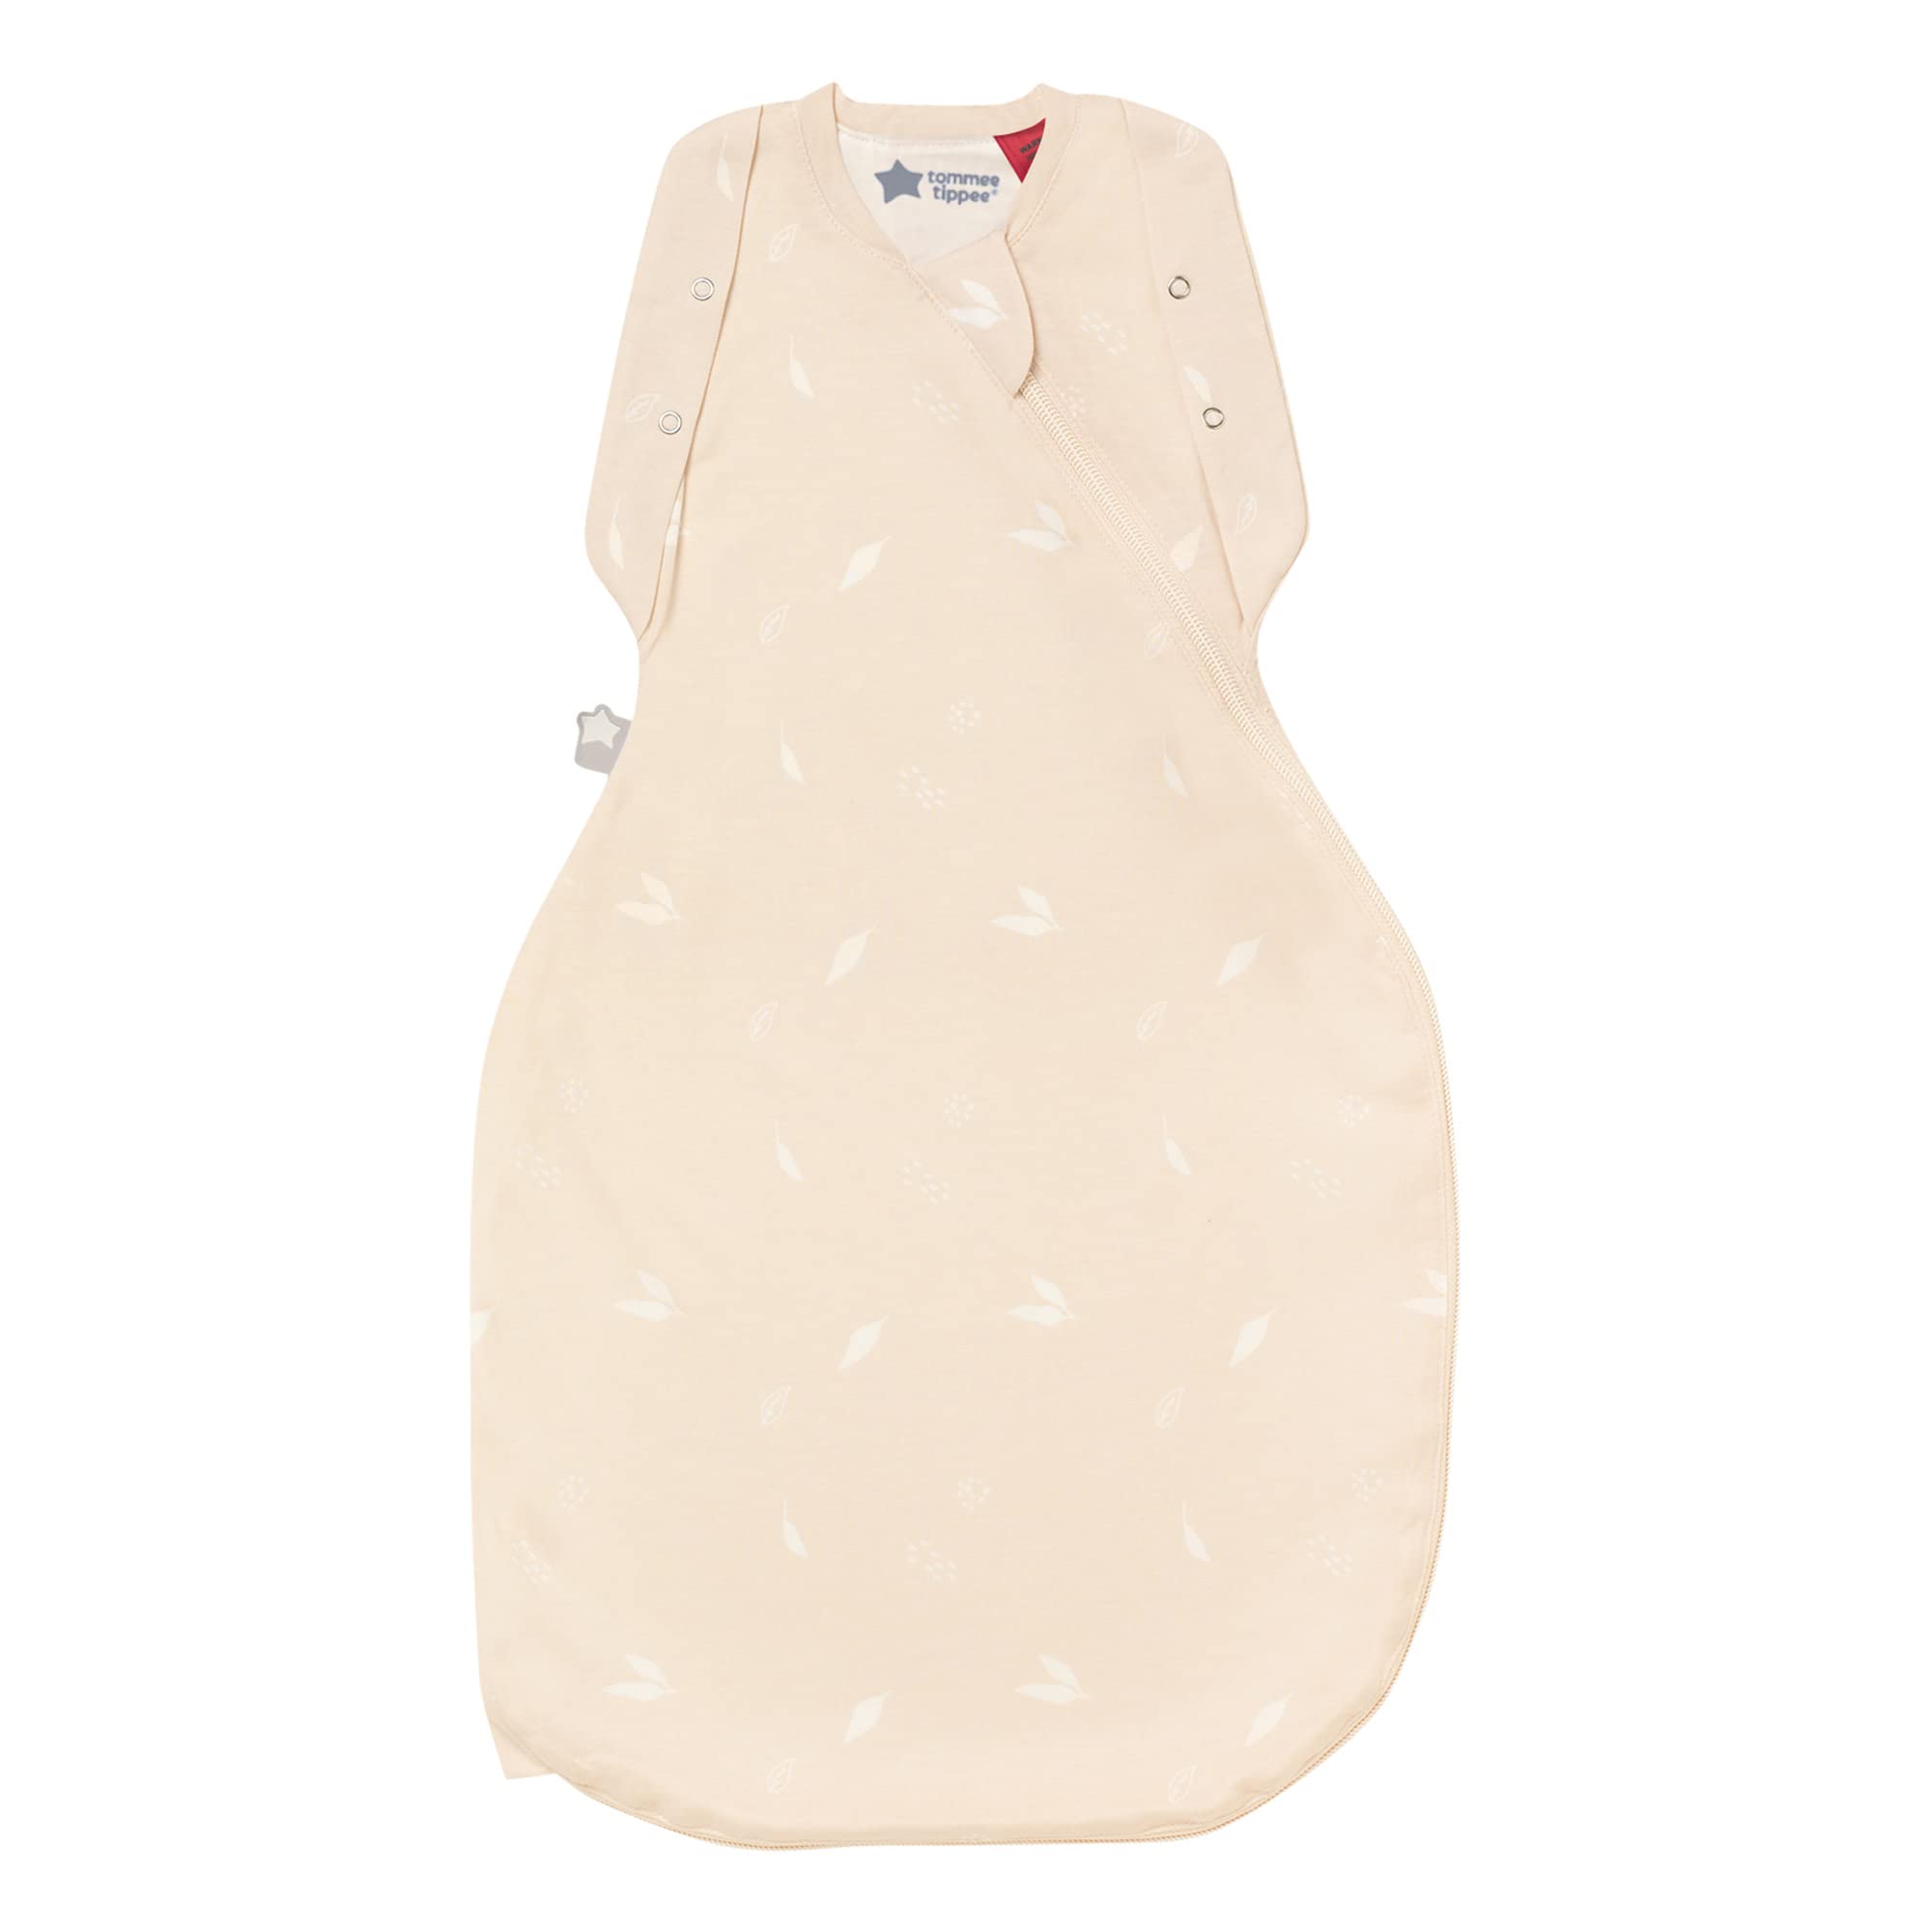 Tommee Tippee Baby Sleep Bag for Newborns, 0-3m, 1.0 TOG, The Original Grobag Swaddle Bag, Hip-Healthy Design, Soft Bamboo-Rich Fabric, Soft Petal Pink